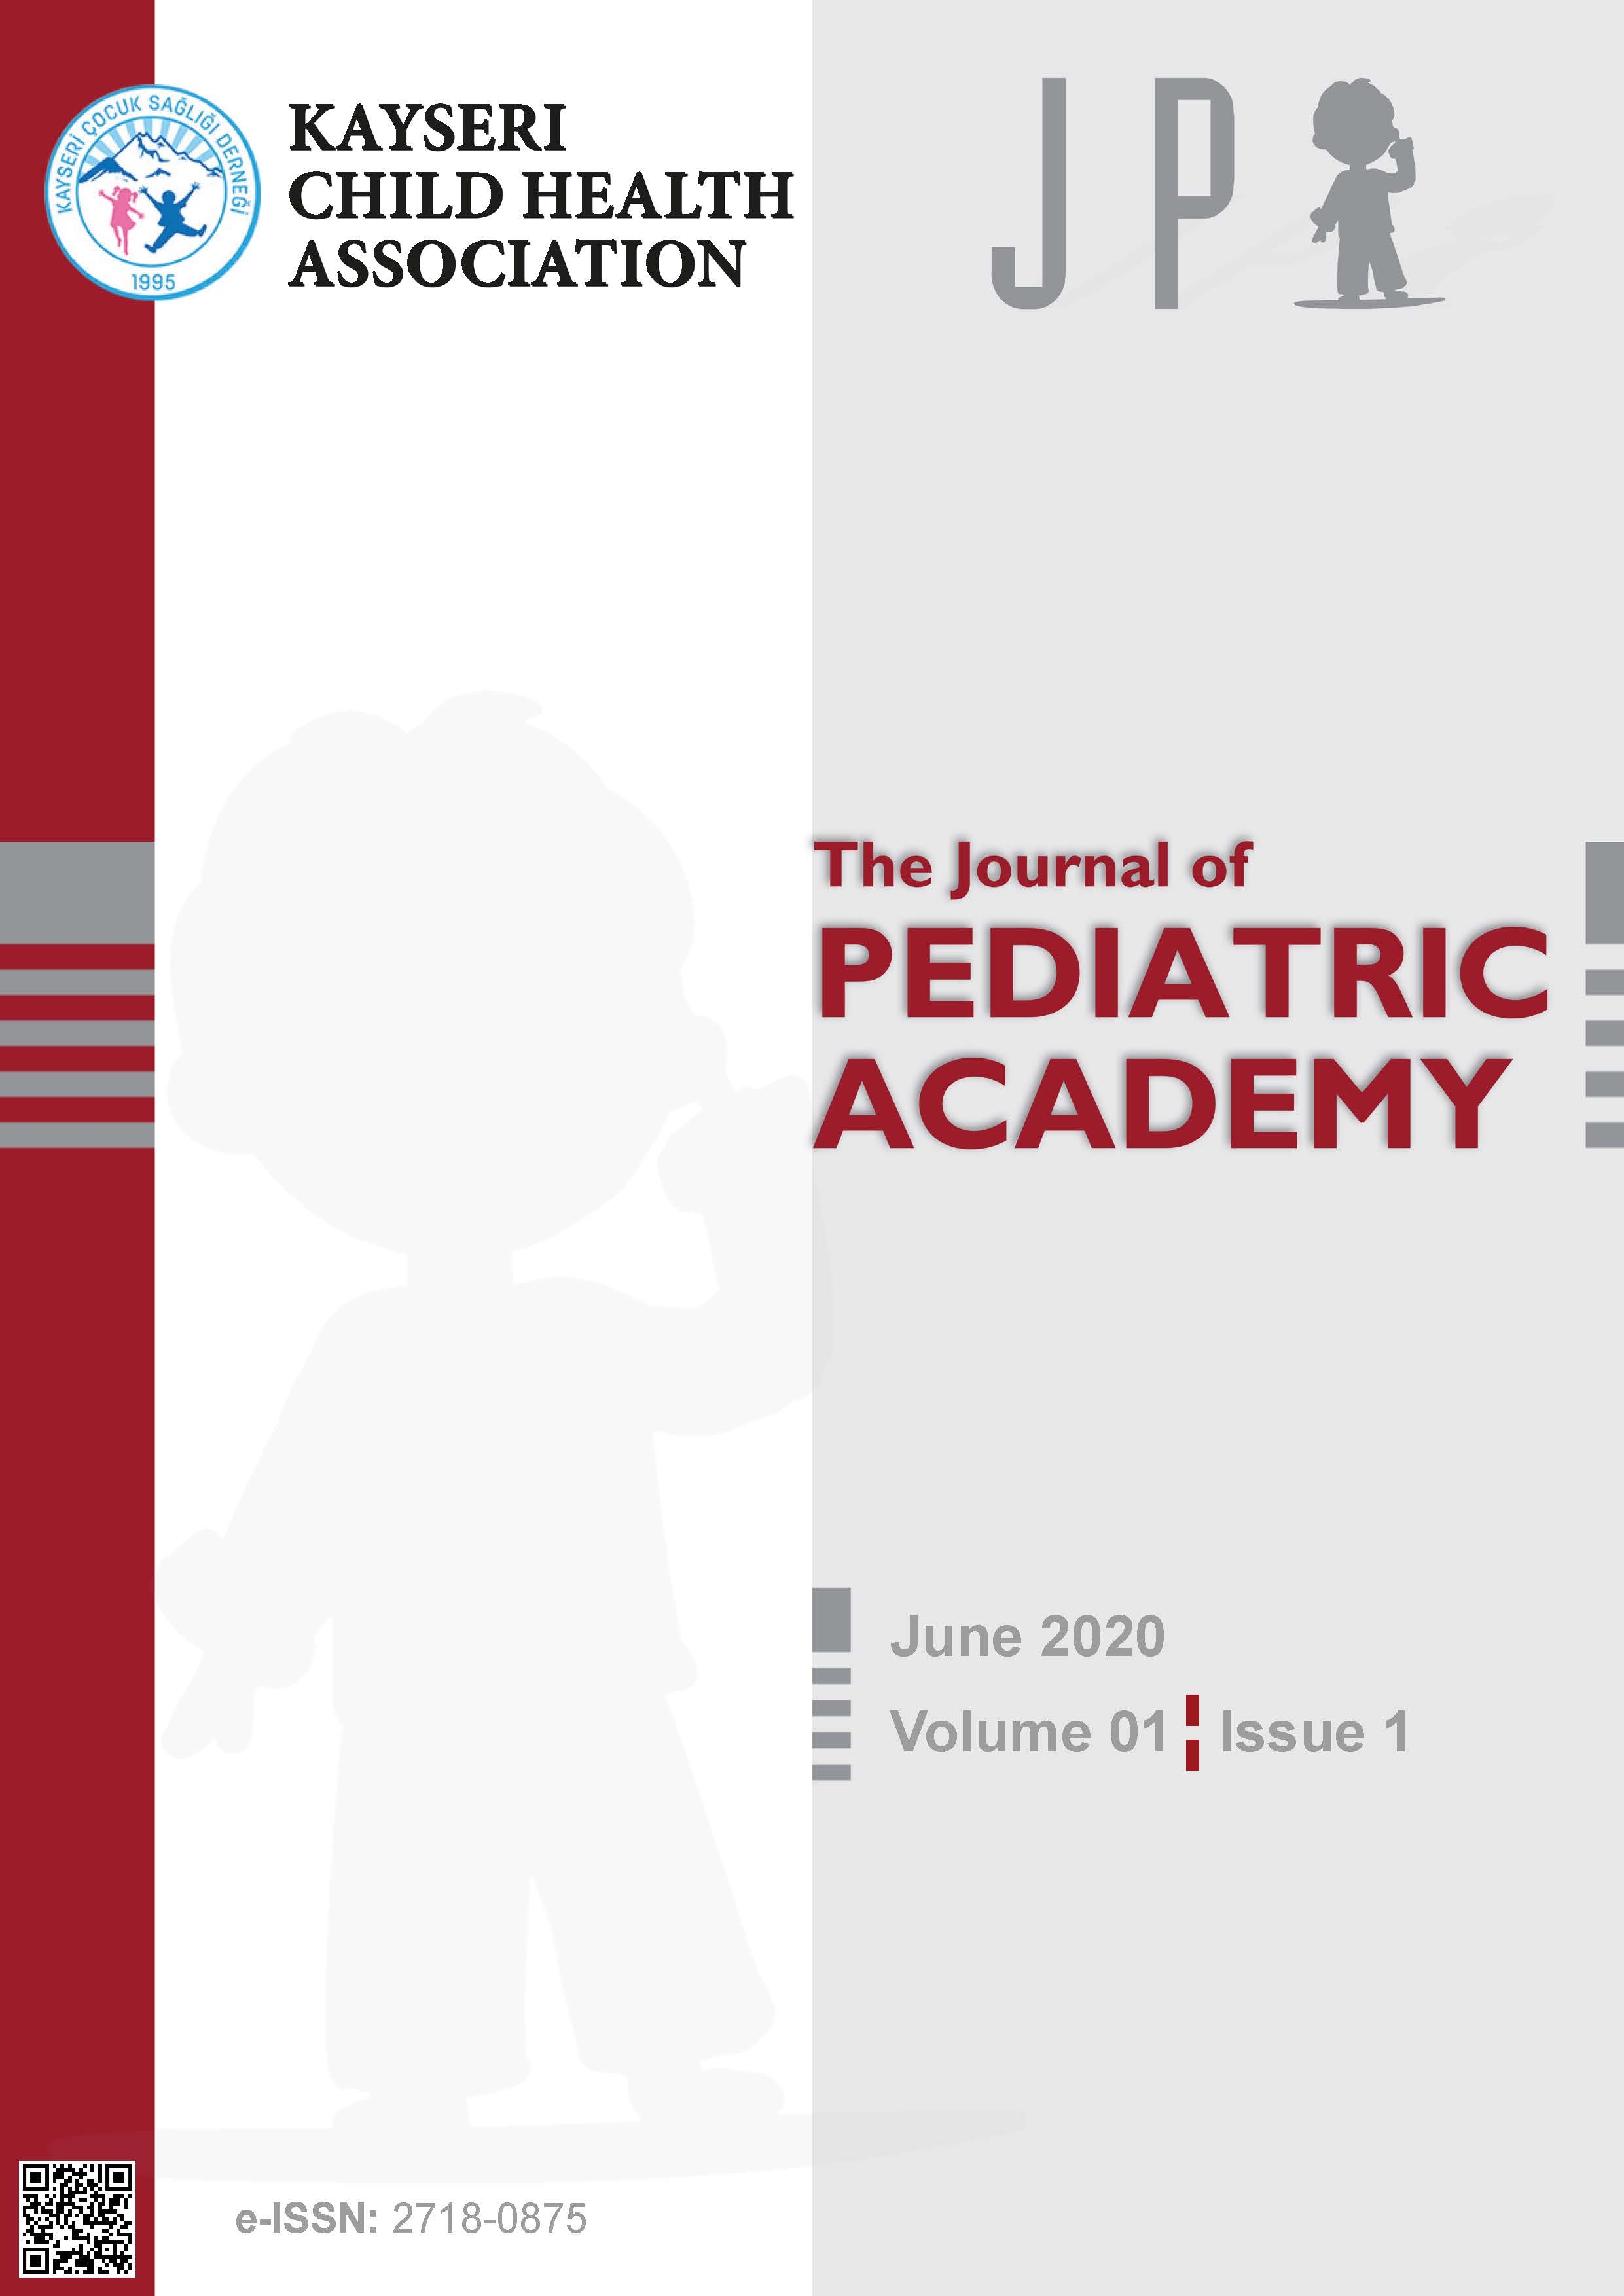 The Journal of Pediatric Academy